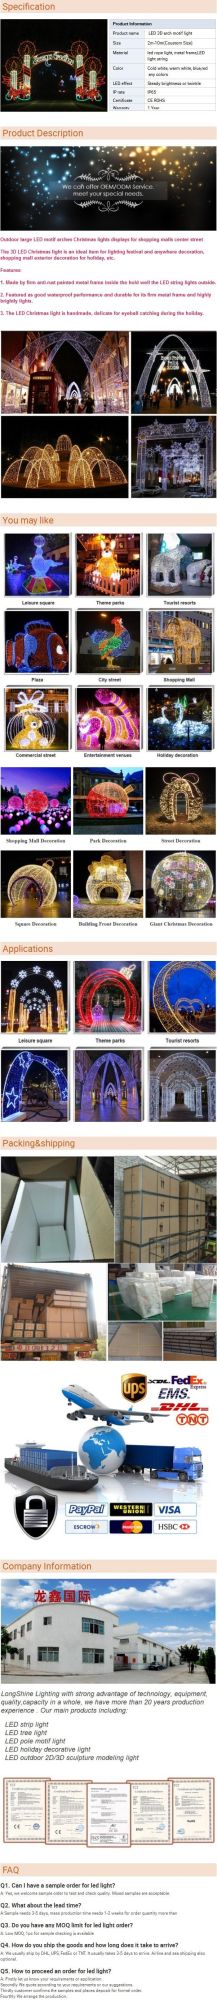 Large LED 3D Arch Motif Light for Outdoor Street Decoration